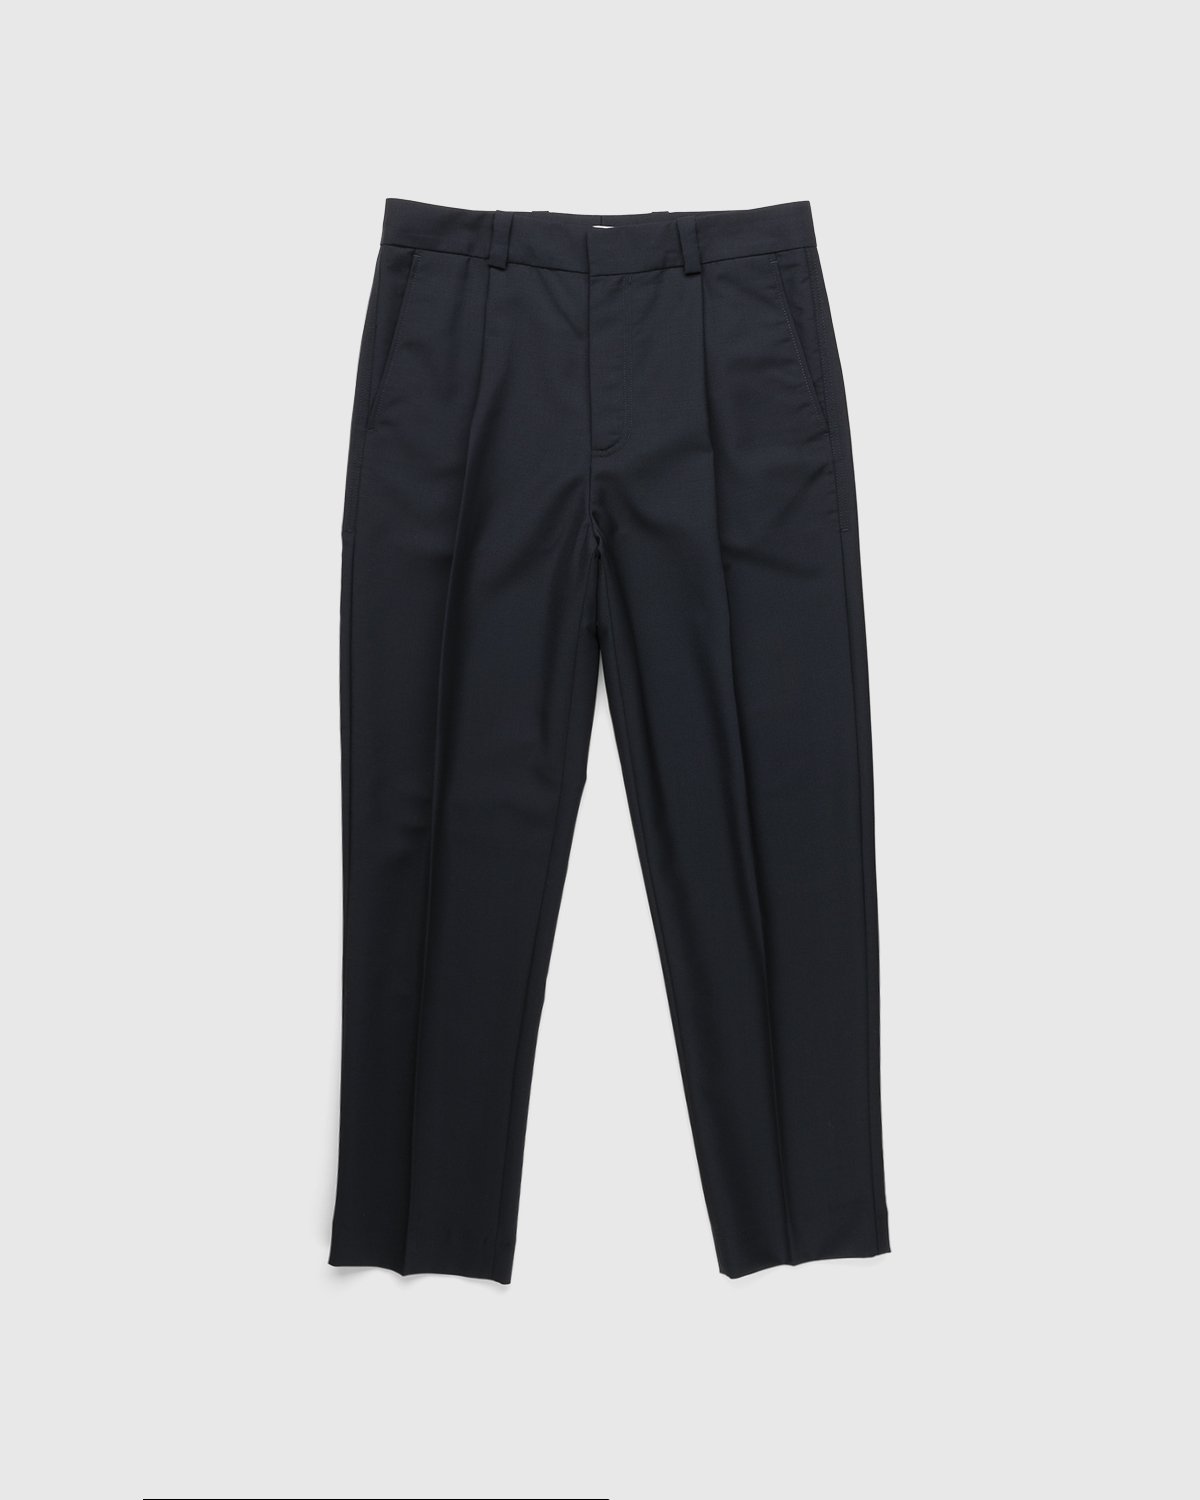 Acne Studios - Mohair Pleated Trousers Navy - Clothing - Blue - Image 1